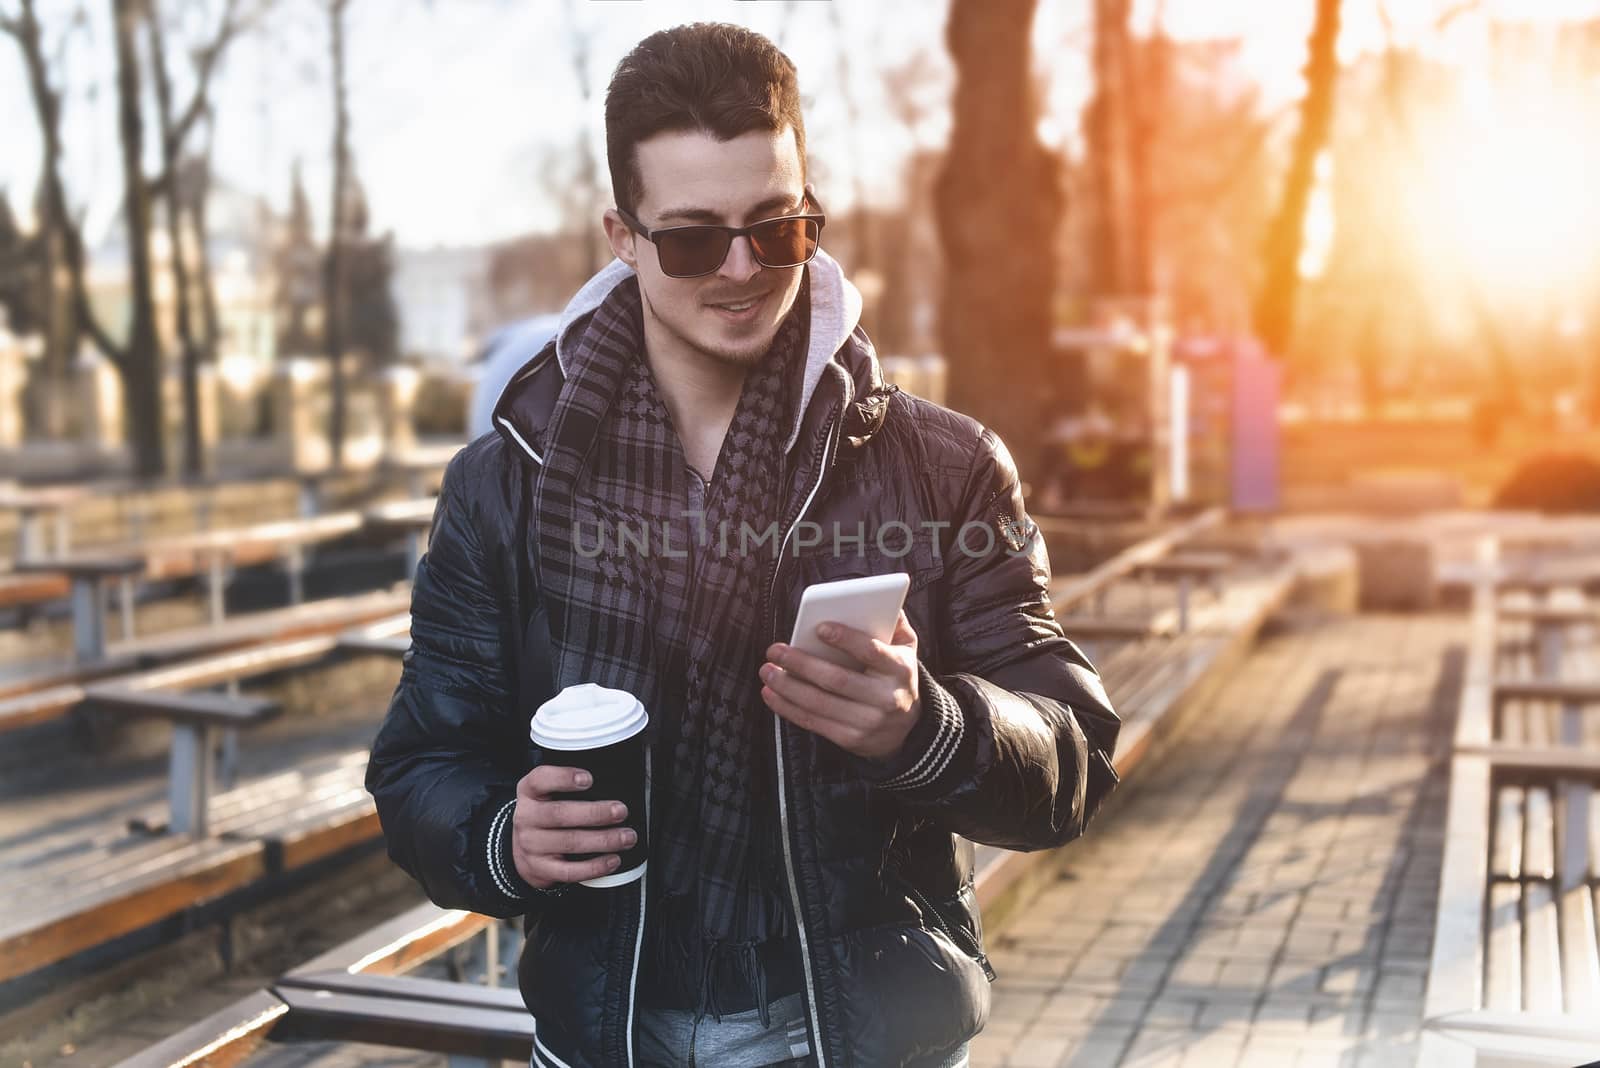 Portrait of attractive man in wearing jacket using mobile phone and holding takeaway coffee while walking through city street.